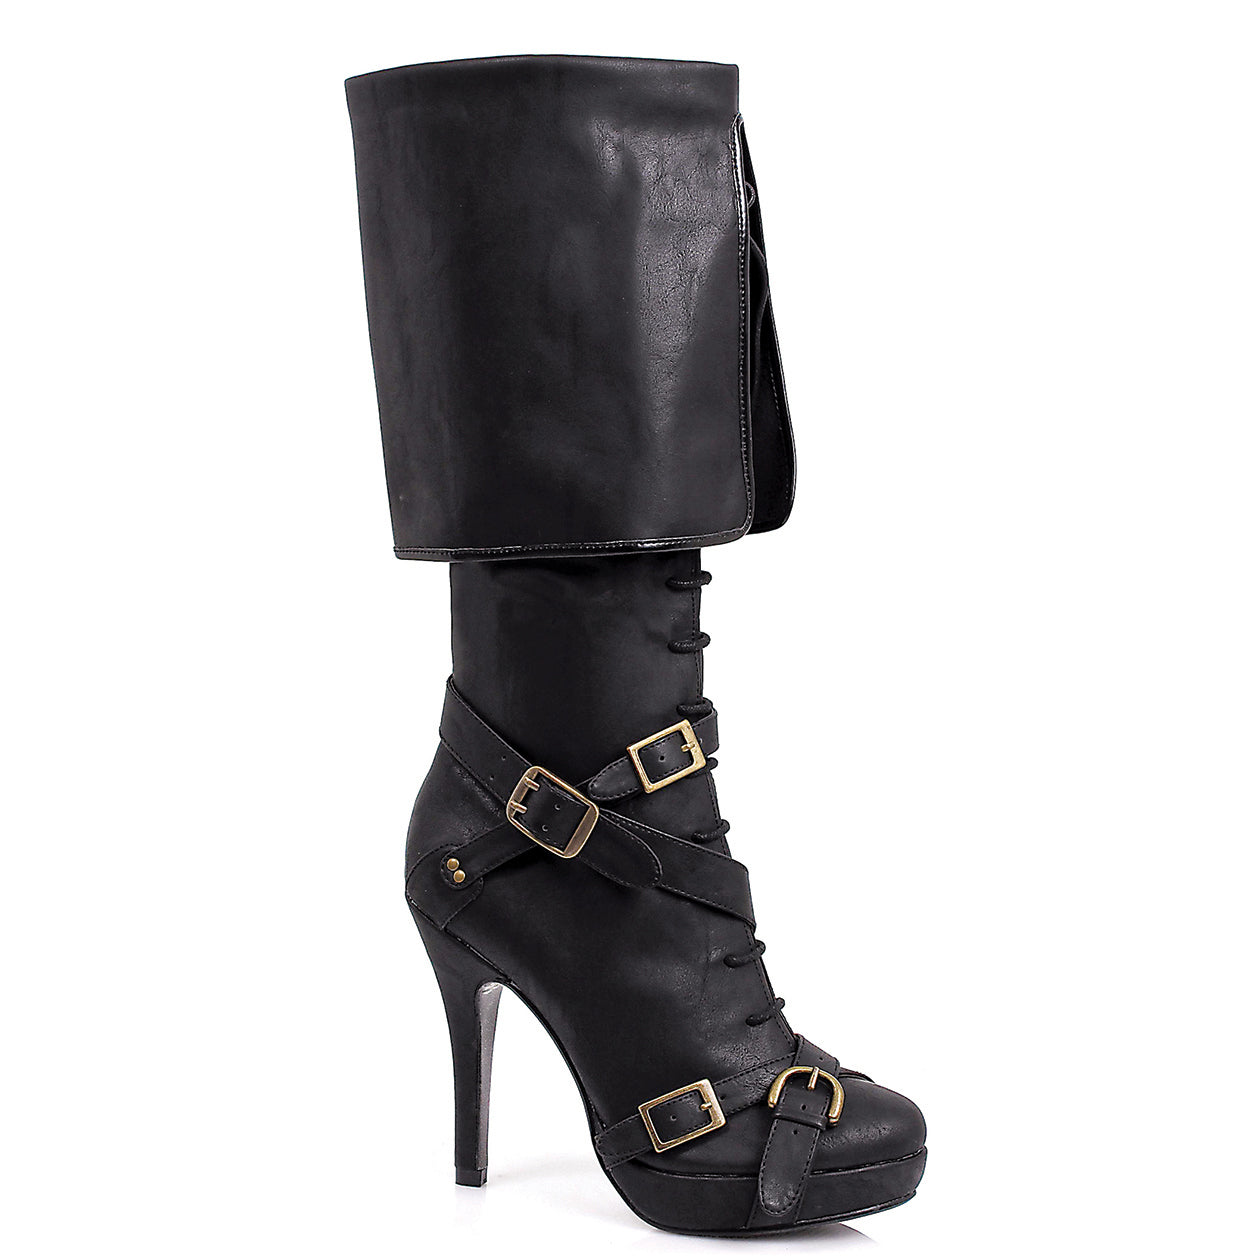 4" Heel Knee High Boot with Criss Cross Straps and Buckles